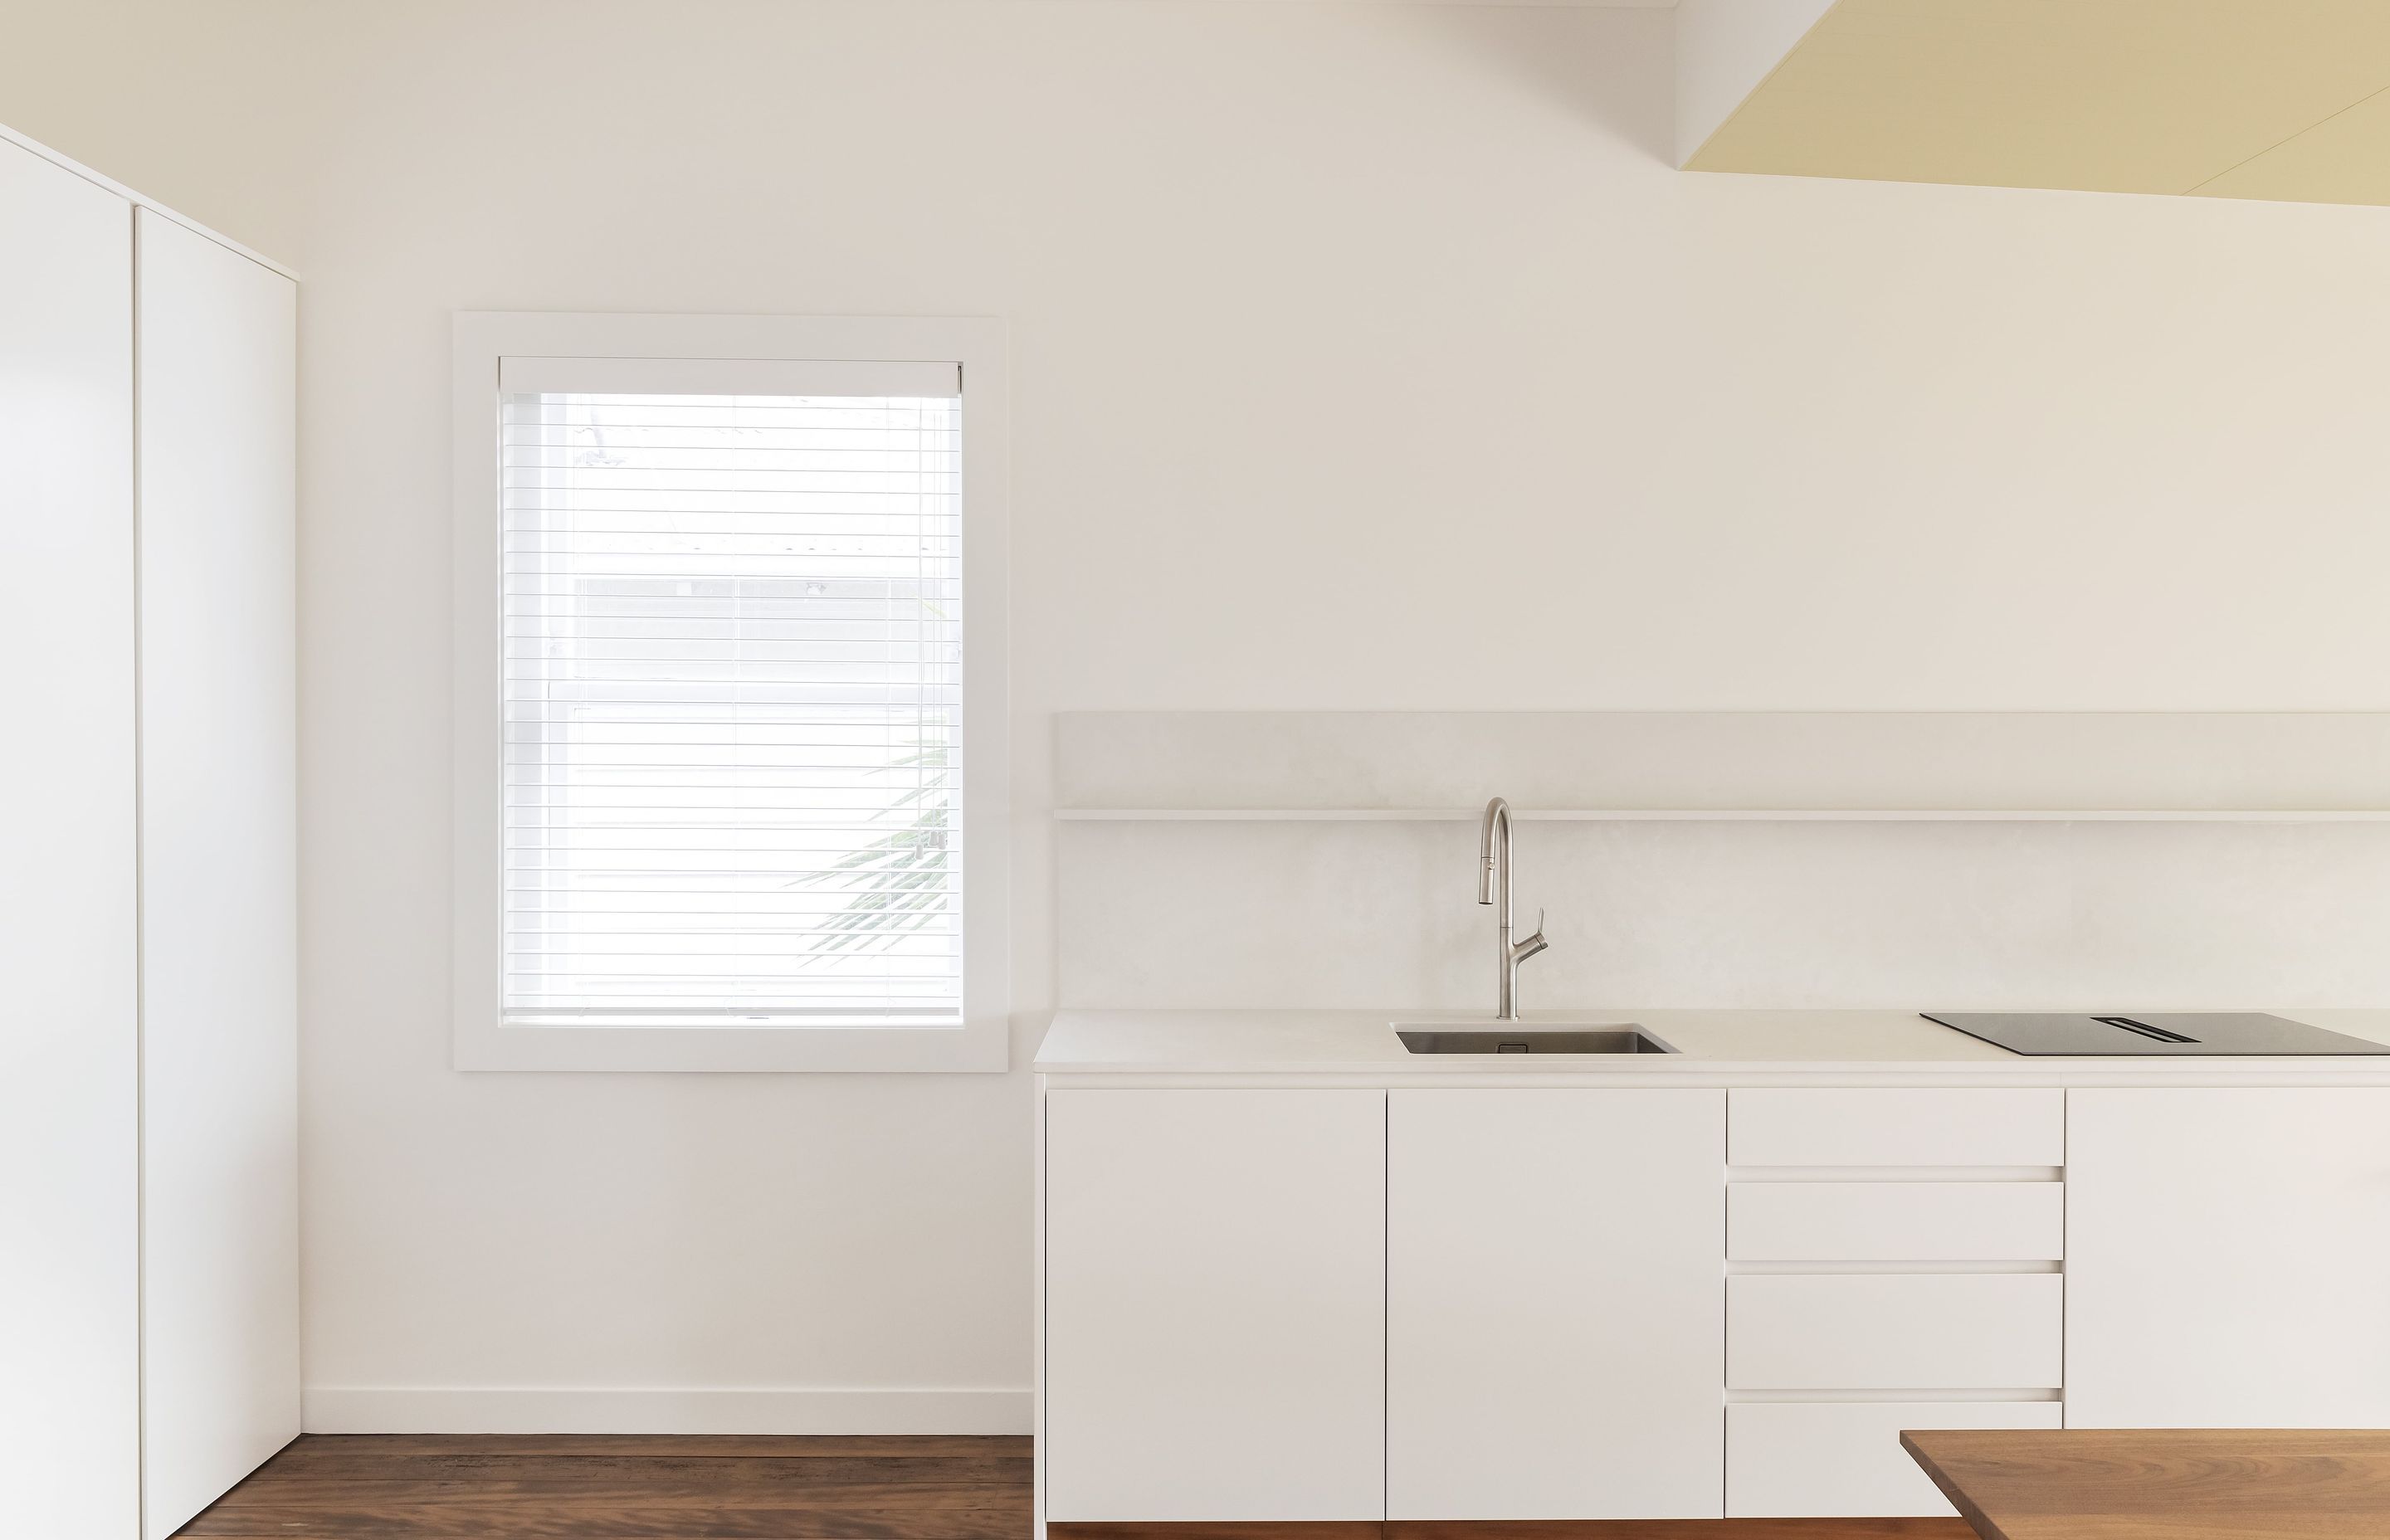 While minimal in design, the kitchen offers ample storage. Photo: David Straight